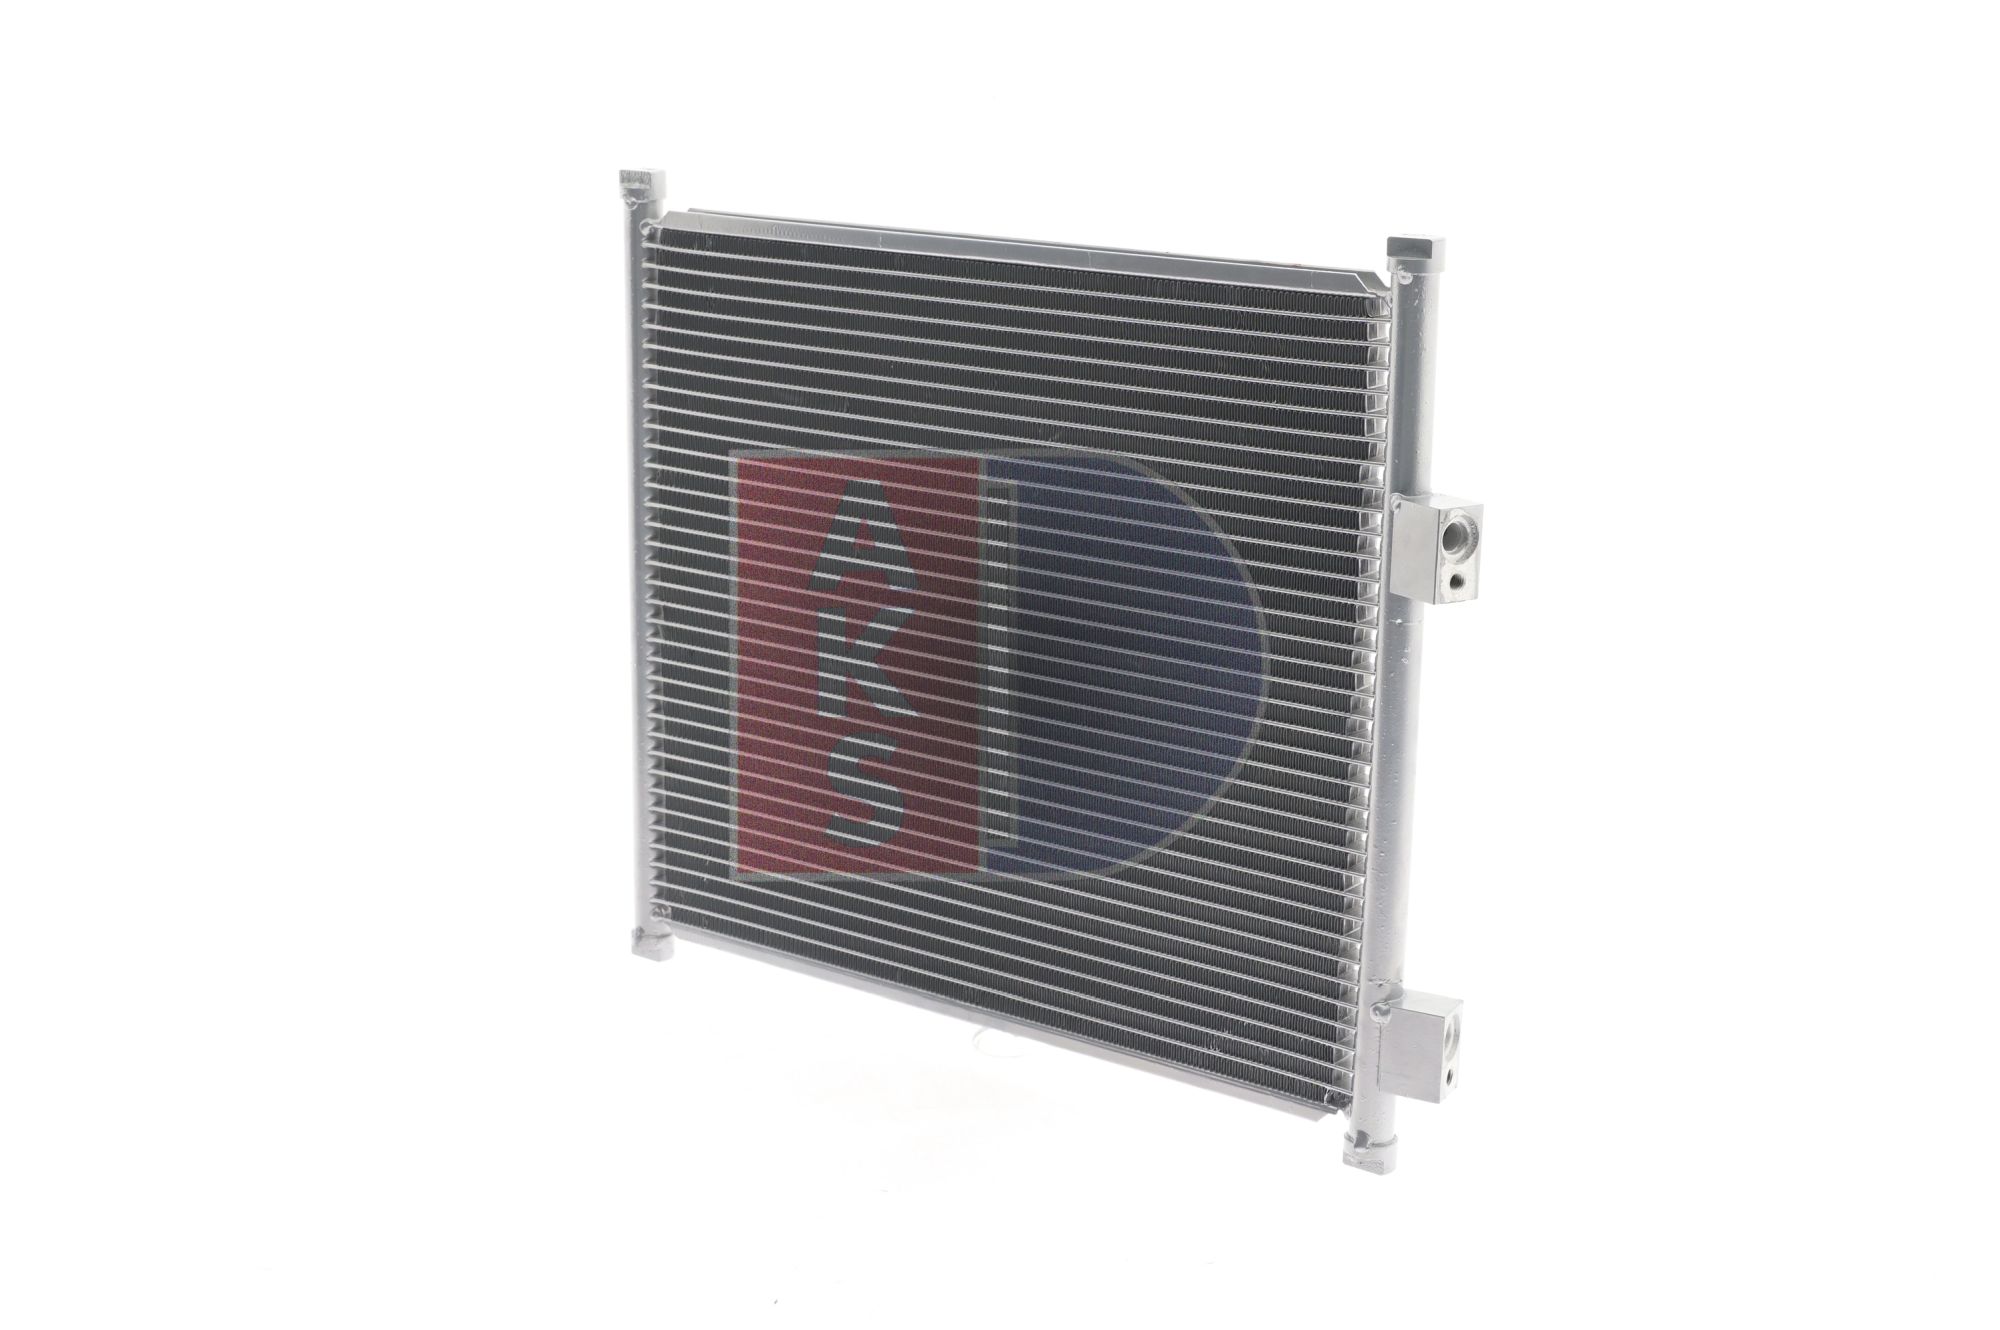 AKS DASIS 092160N Air conditioning condenser without dryer, 13,8mm, 13,8mm, 400mm